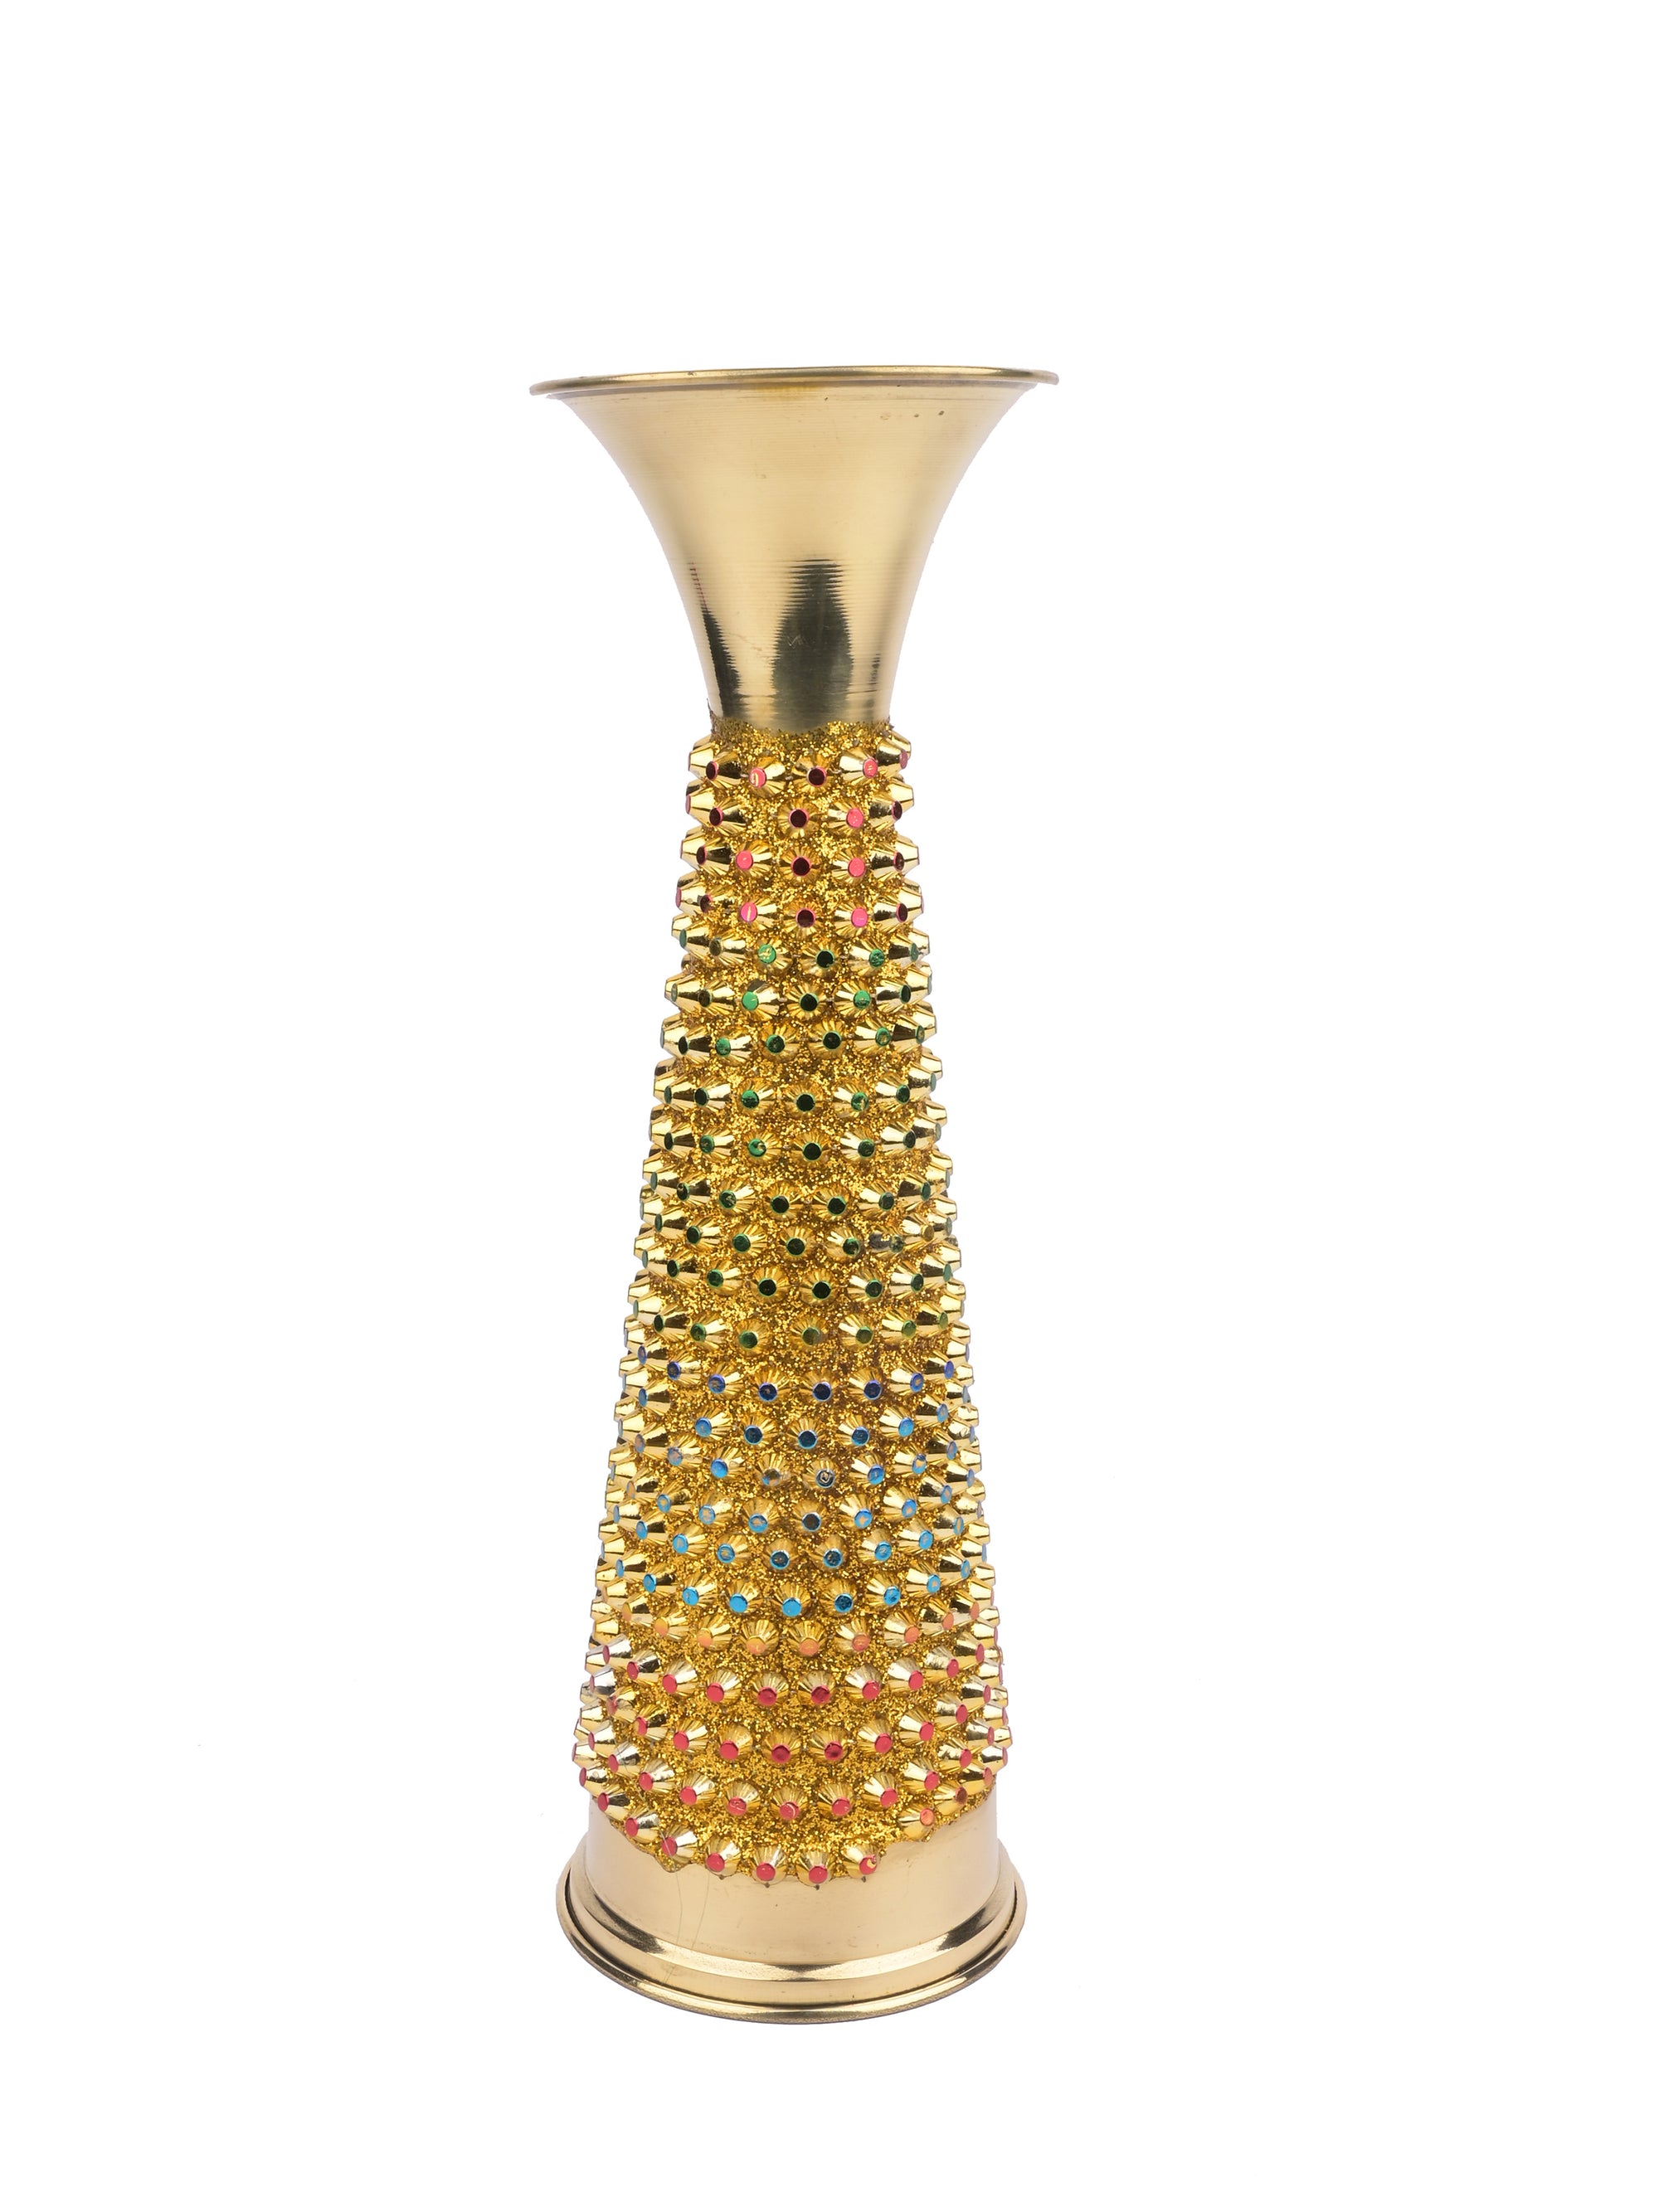 Tall Colorful Decorative Flower Vase made of Brass - 12 inches height - The Heritage Artifacts